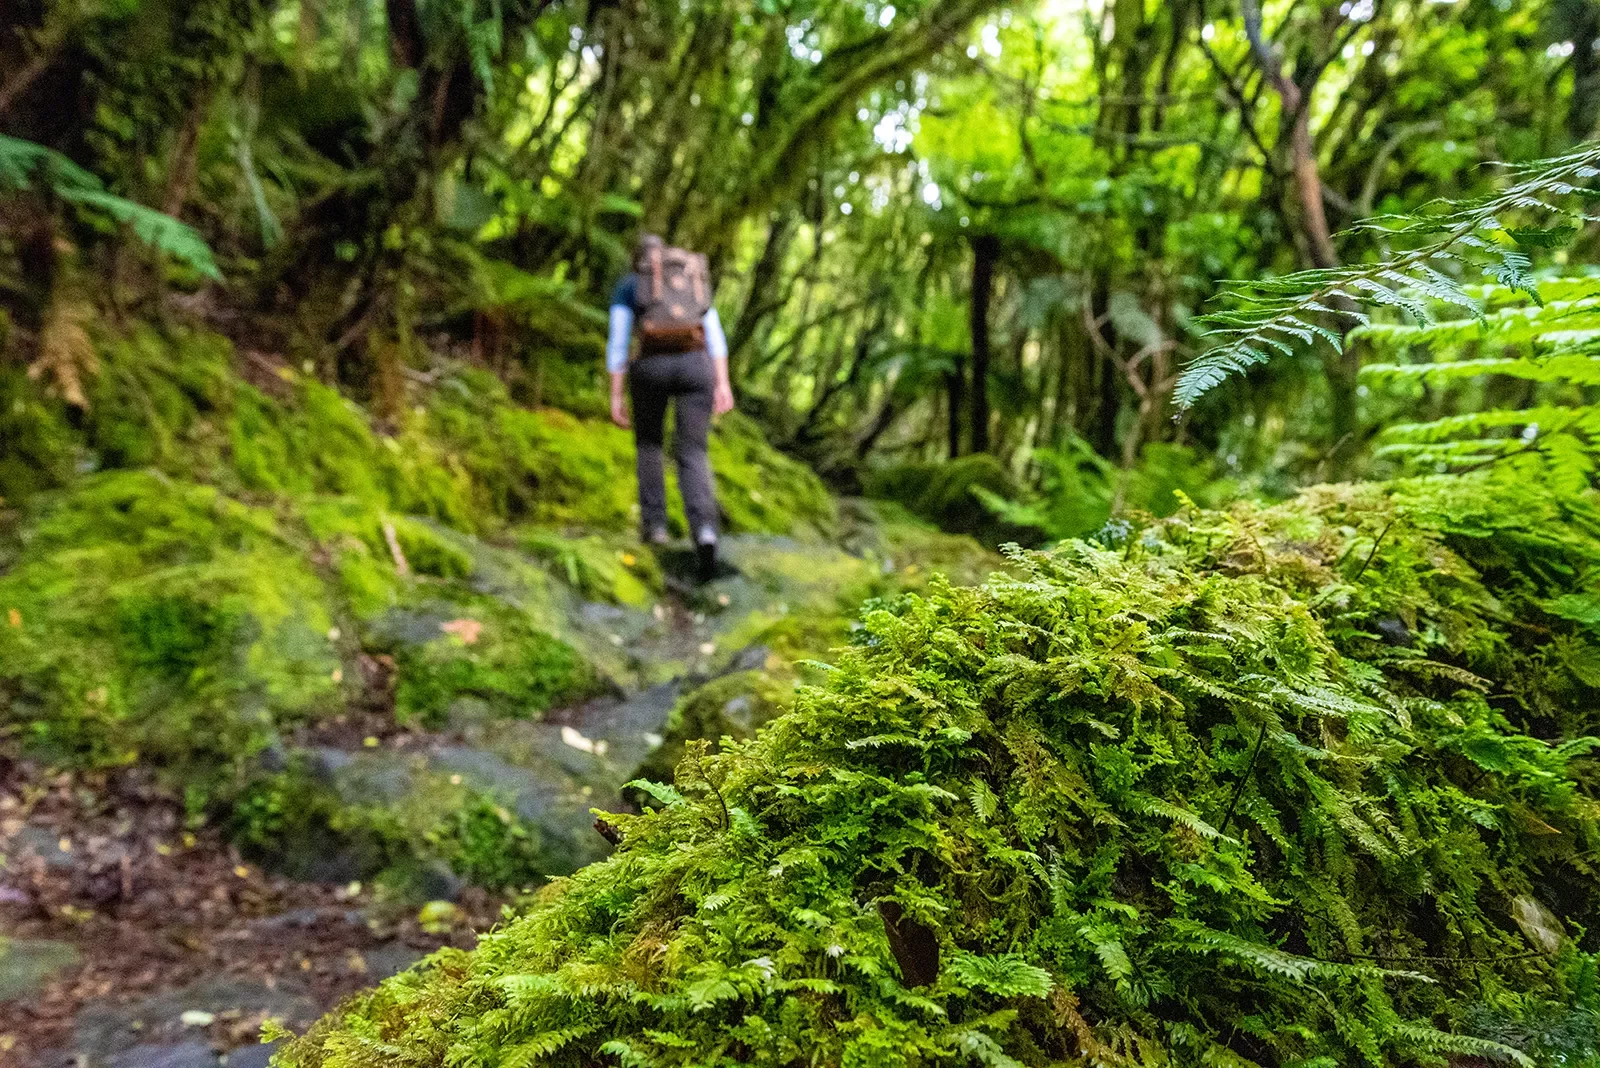 Lush forest in New Zealand